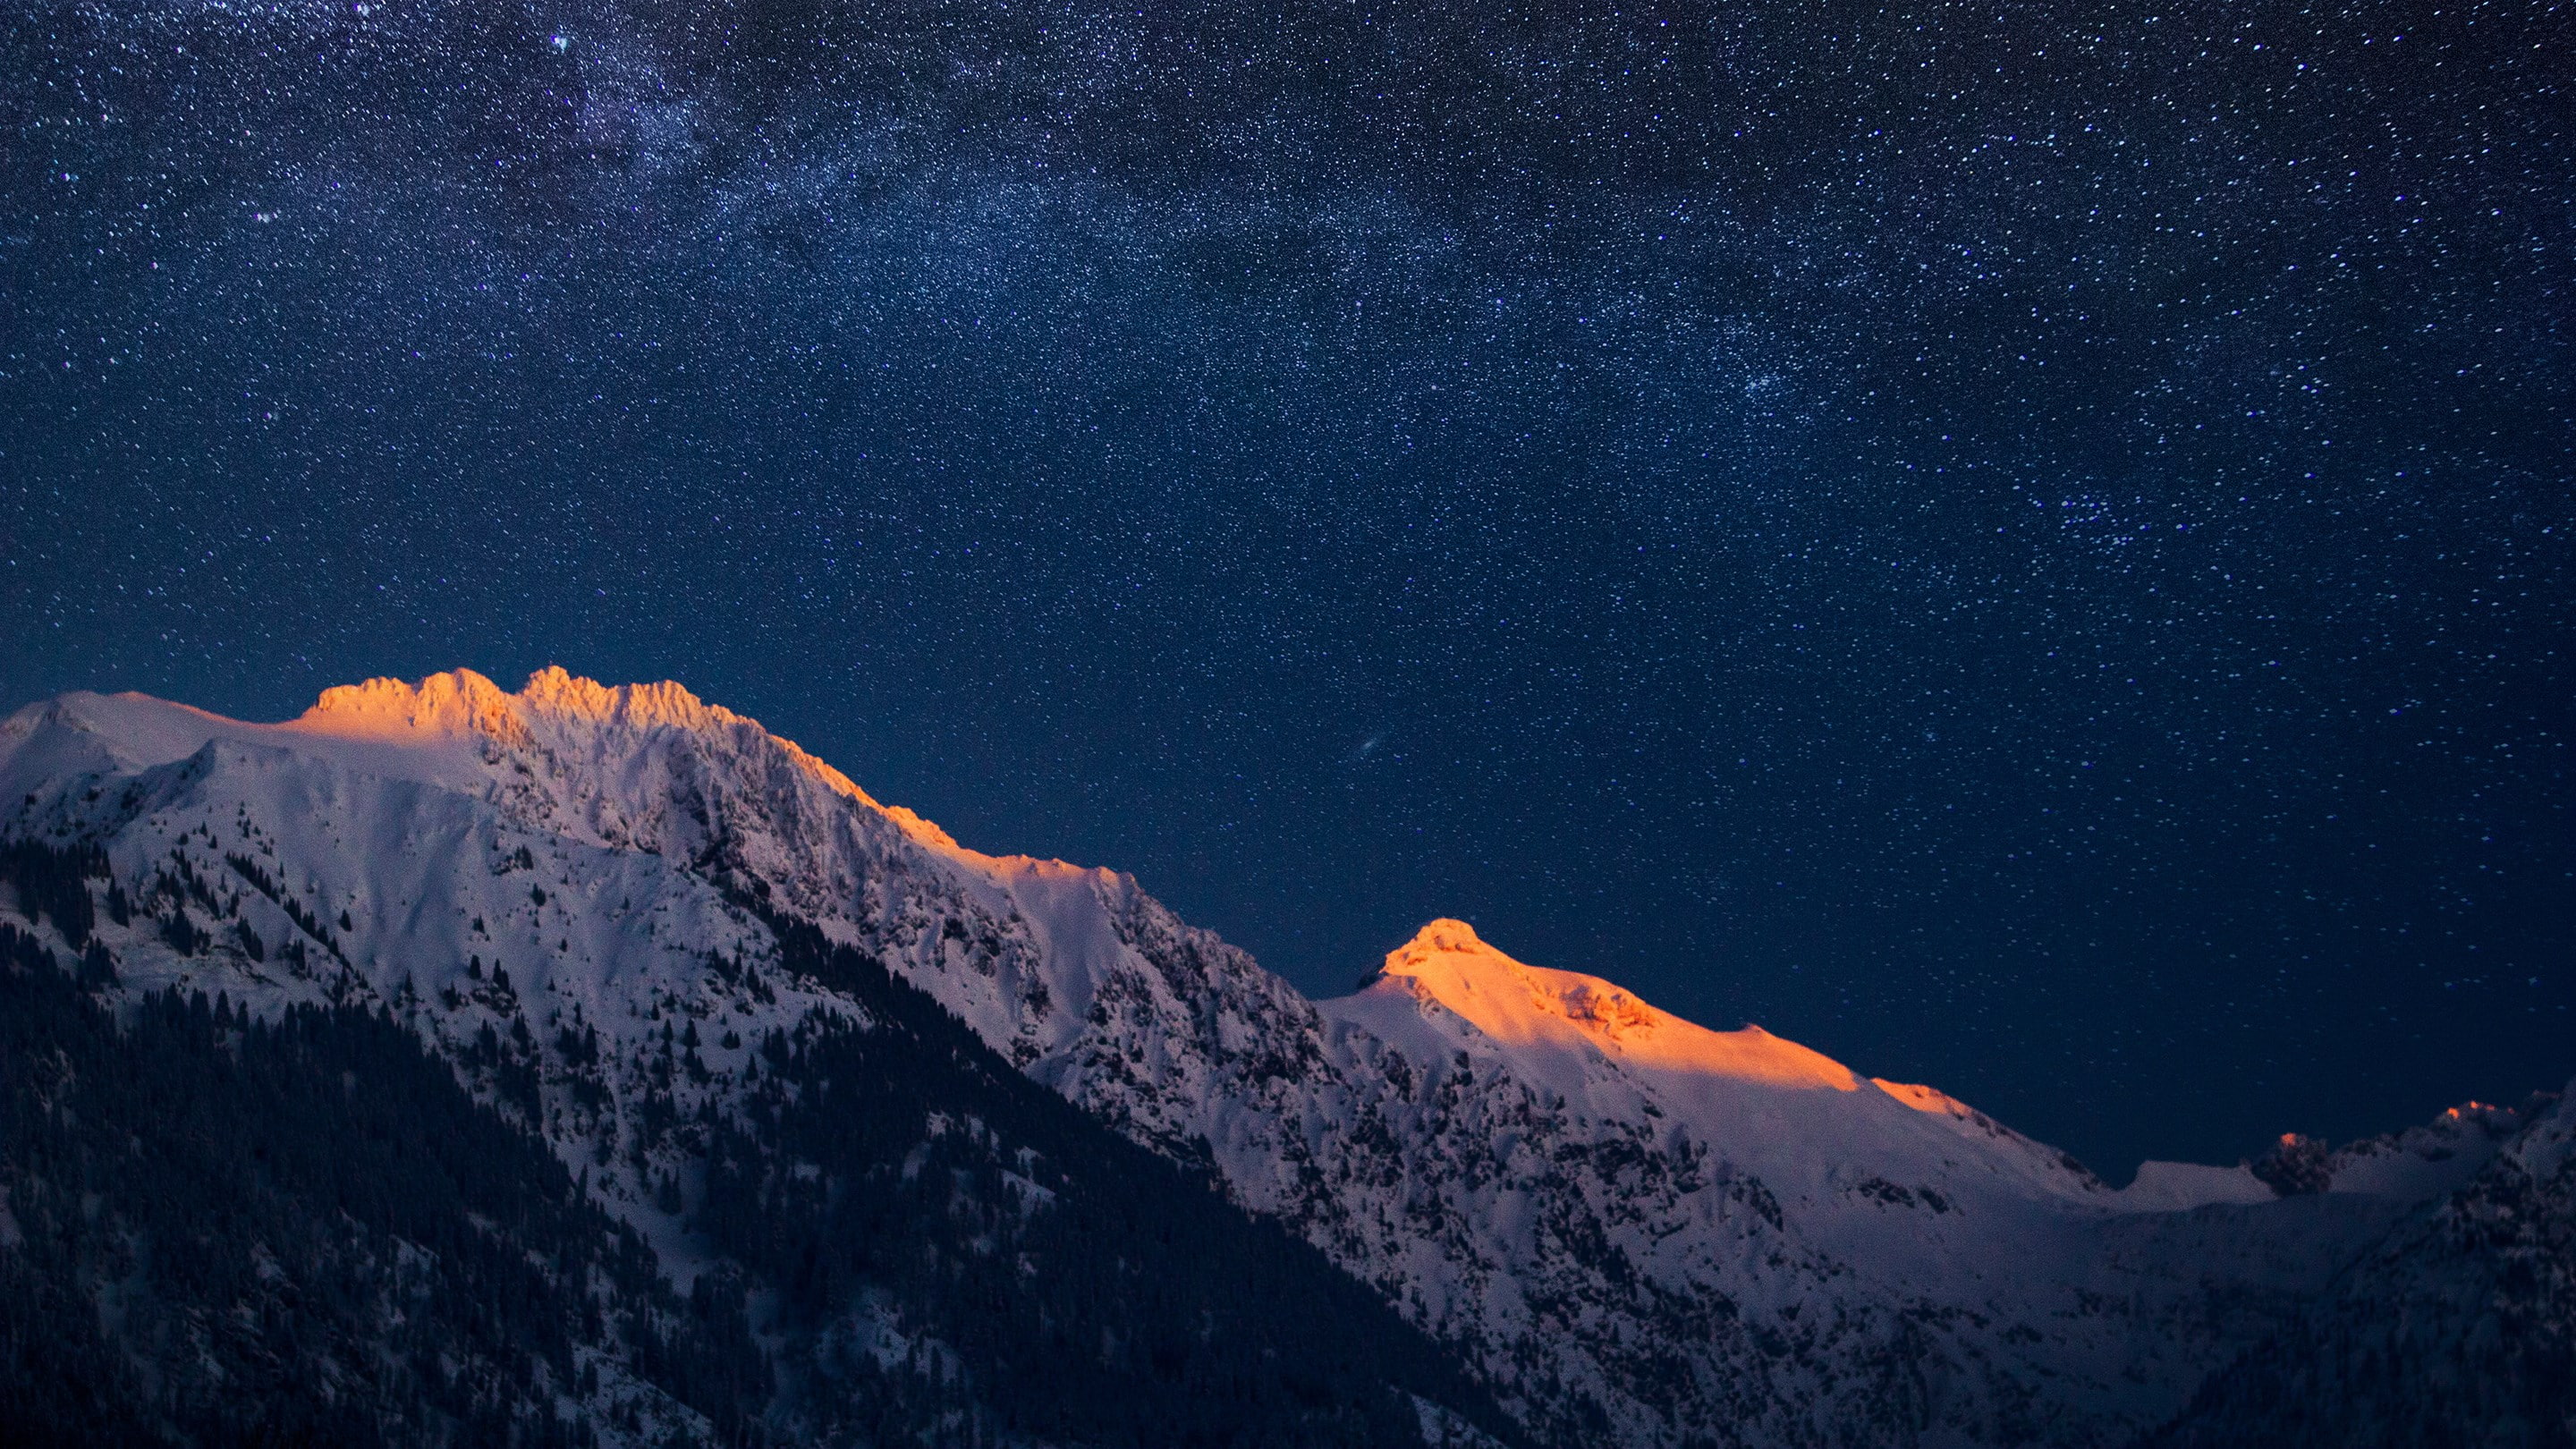 snowy mountains at night with starry sky, beauty in nature